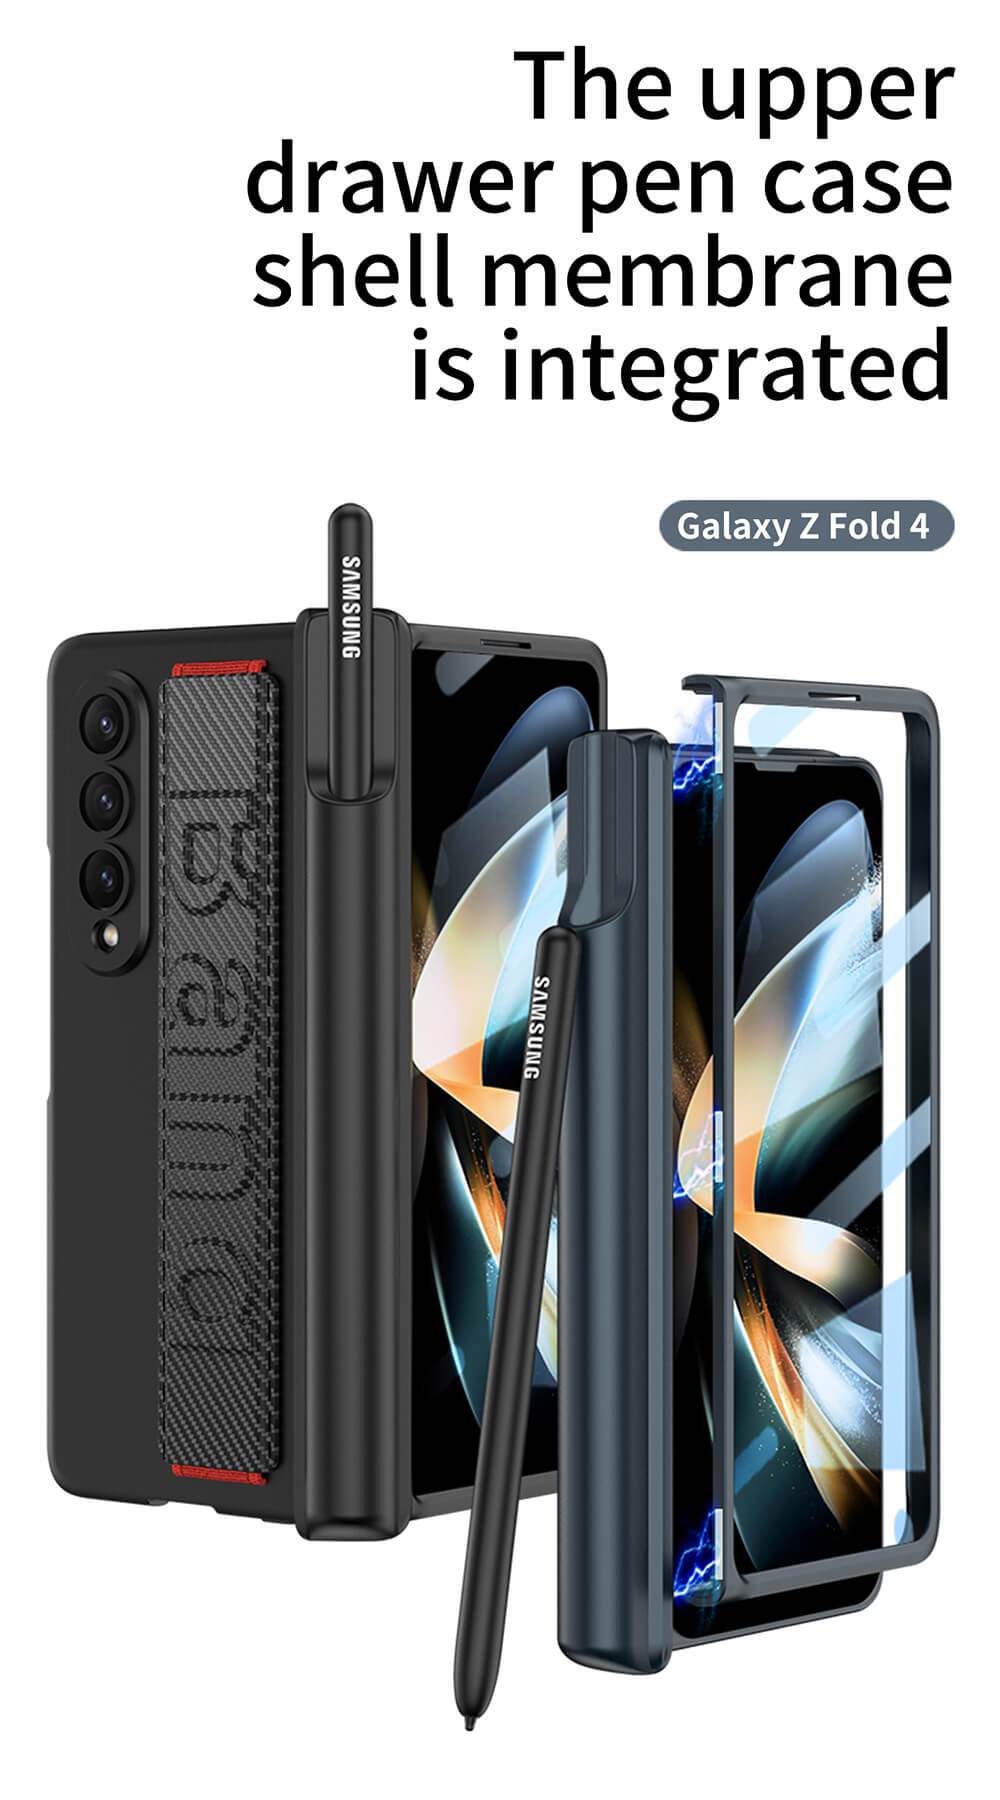 Dealggo UK | Magnetic Hinged Wristband Case with S Pen Slot for Samsung Galaxy Z Fold4